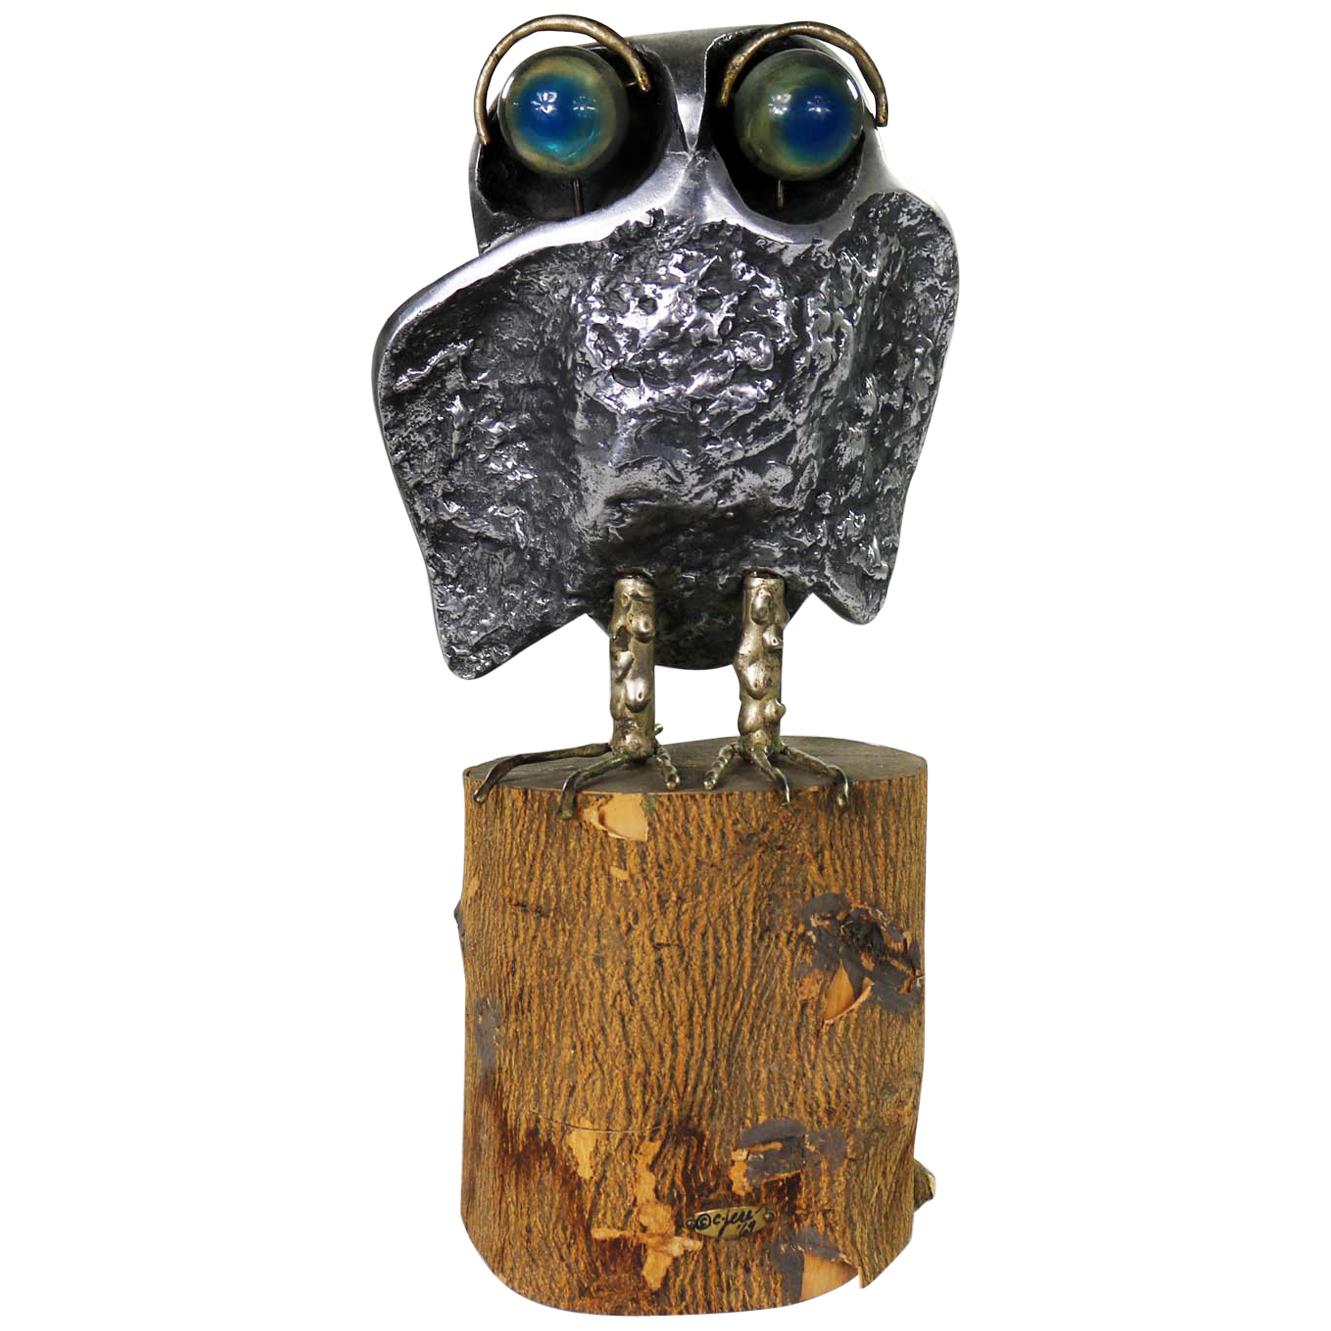 Mid-Century Modern Owl Sculpture by Curtis Jere in Cast Aluminum on Wood Stump